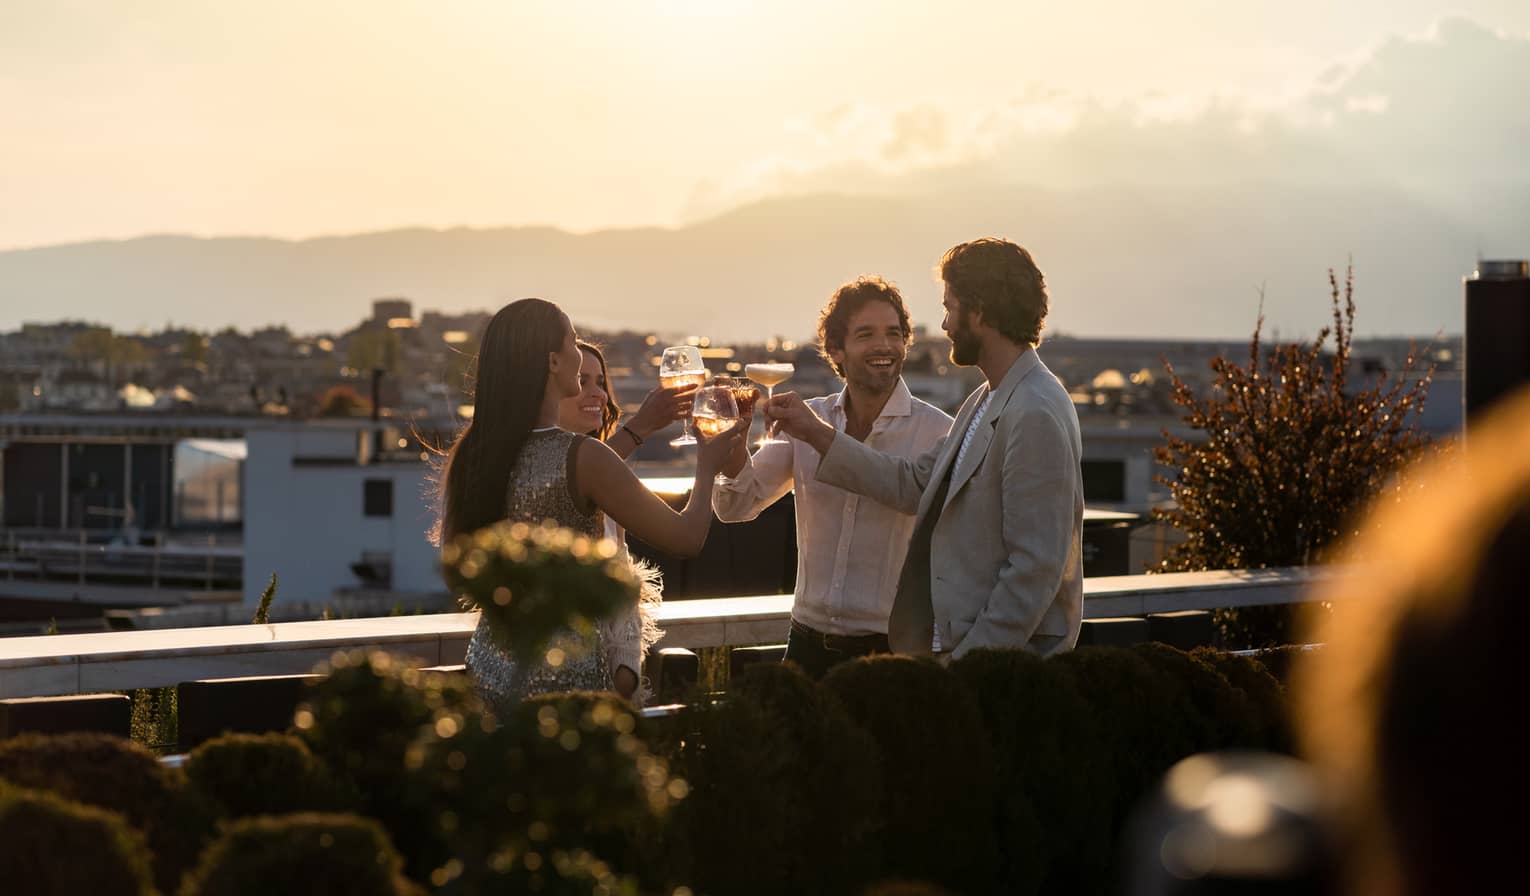 Four friends toasting on rooftop terrace at sunset